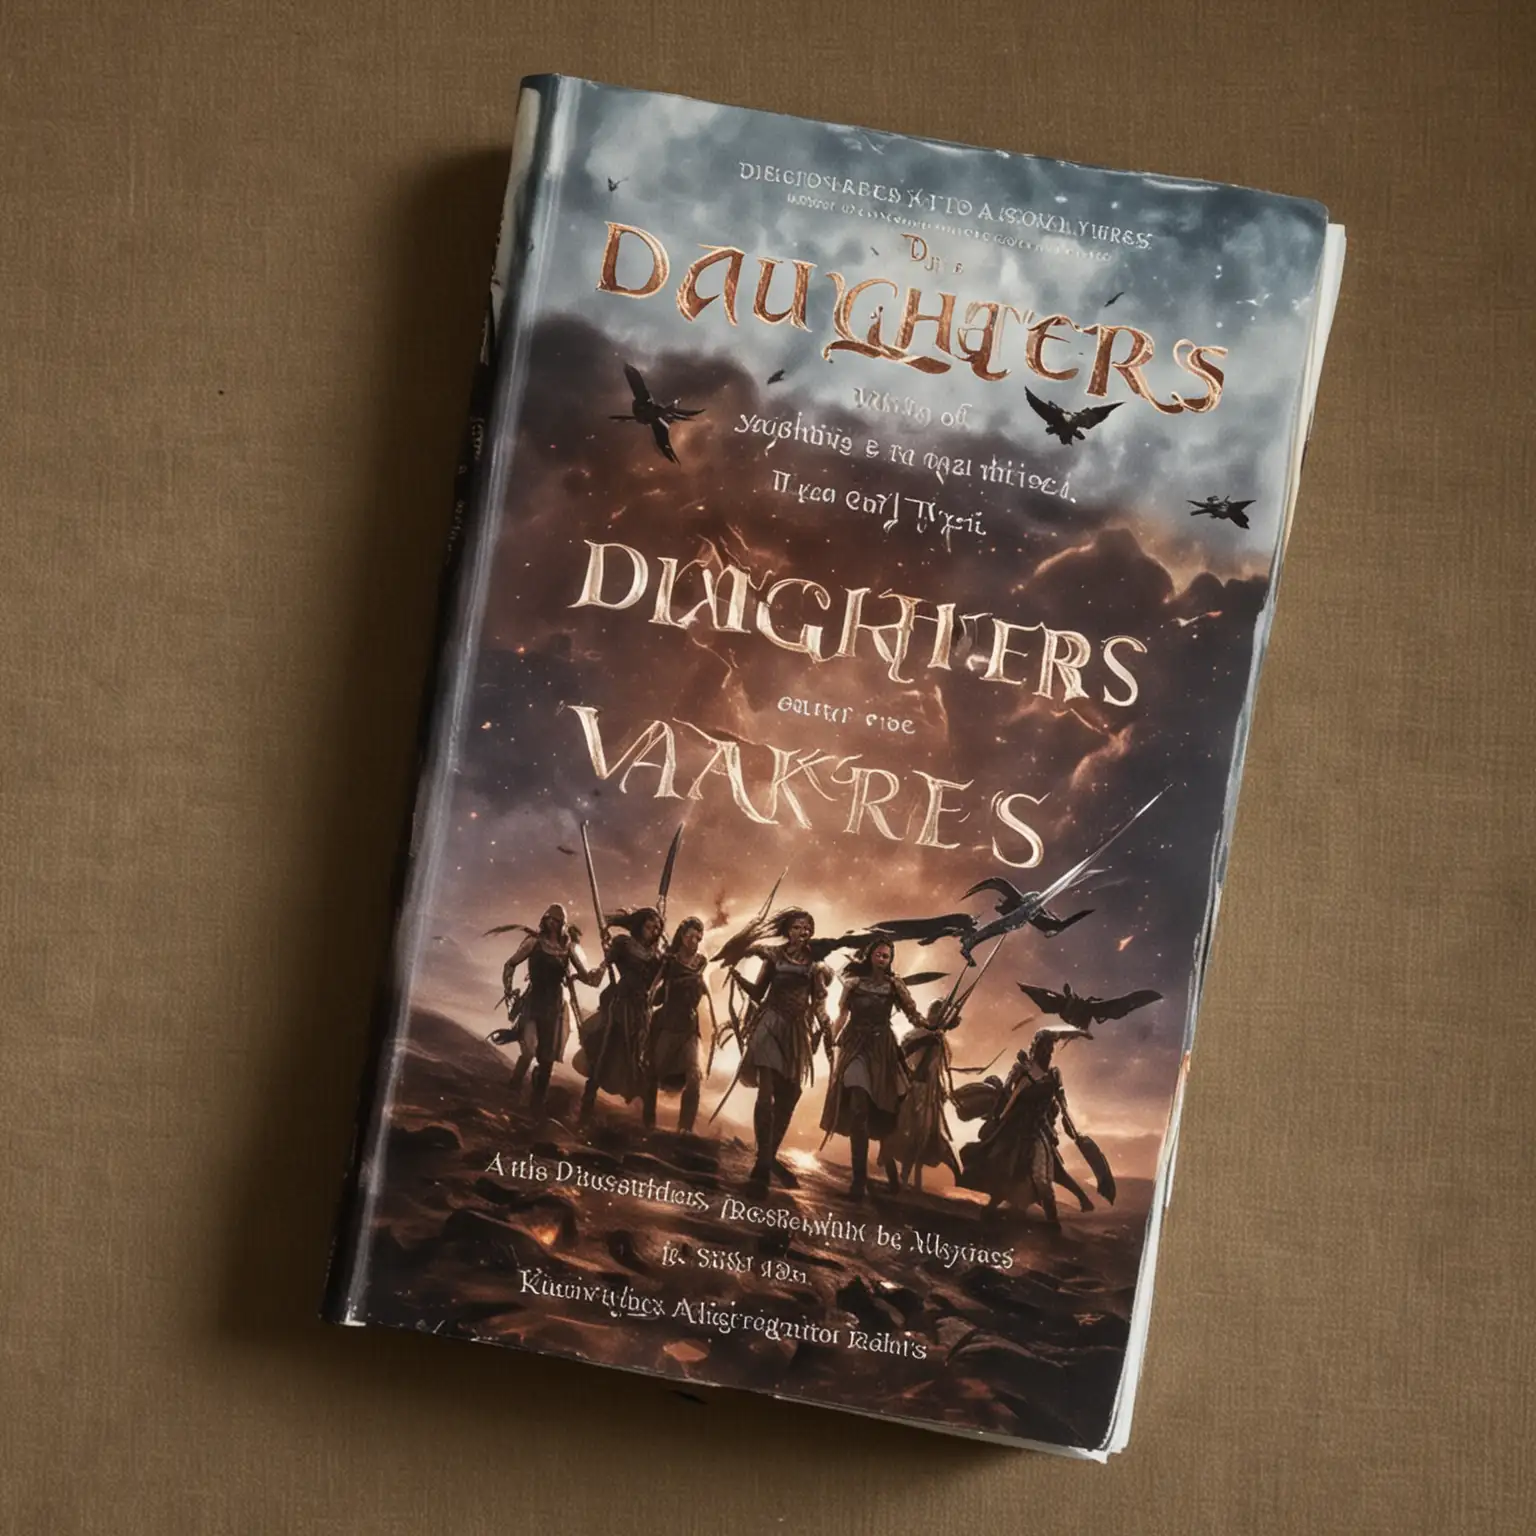 Scinematic picture of a book with the title "Daughters of the Valkyries"